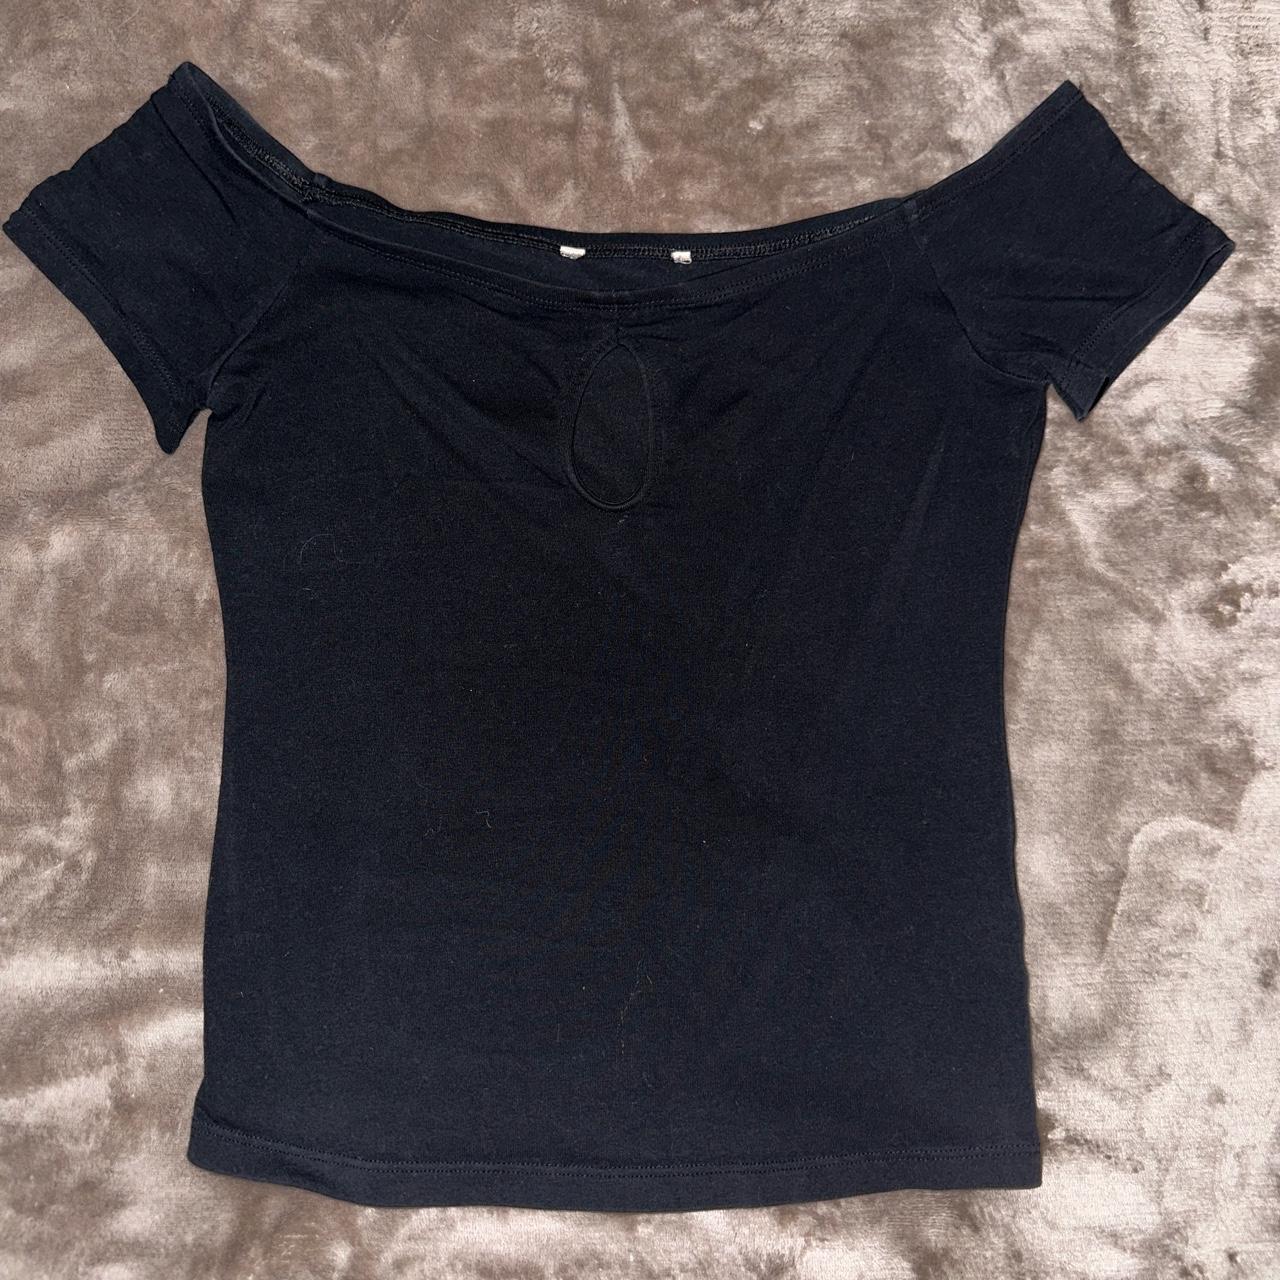 Cute black top with cut out in the front! Barely... - Depop